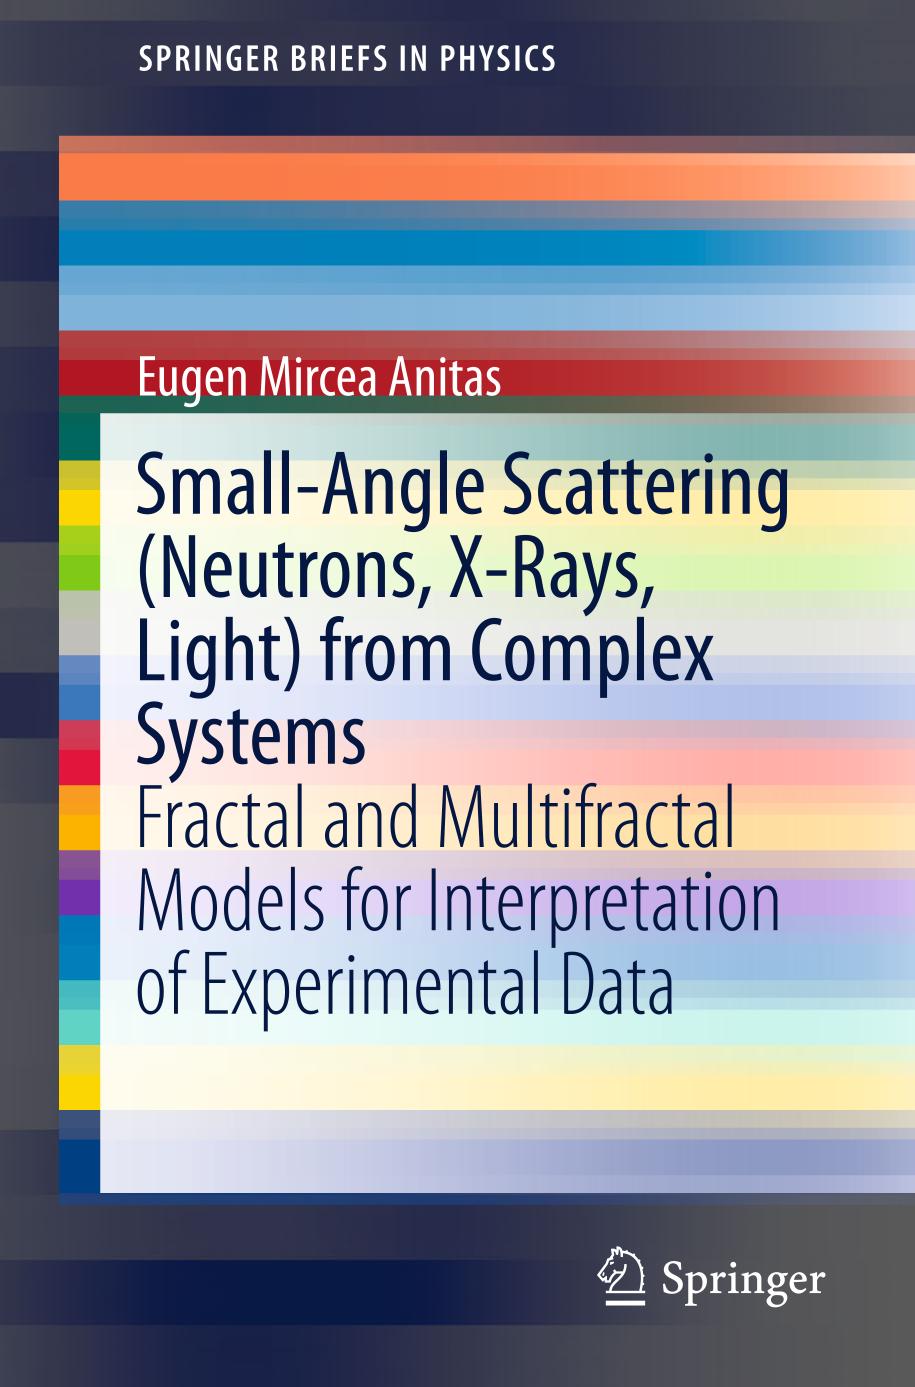 Small-Angle Scattering (Neutrons, X-Rays, Light) from Complex Systems : Fractal and Multifractal Models for Interpretation of Experimental Data